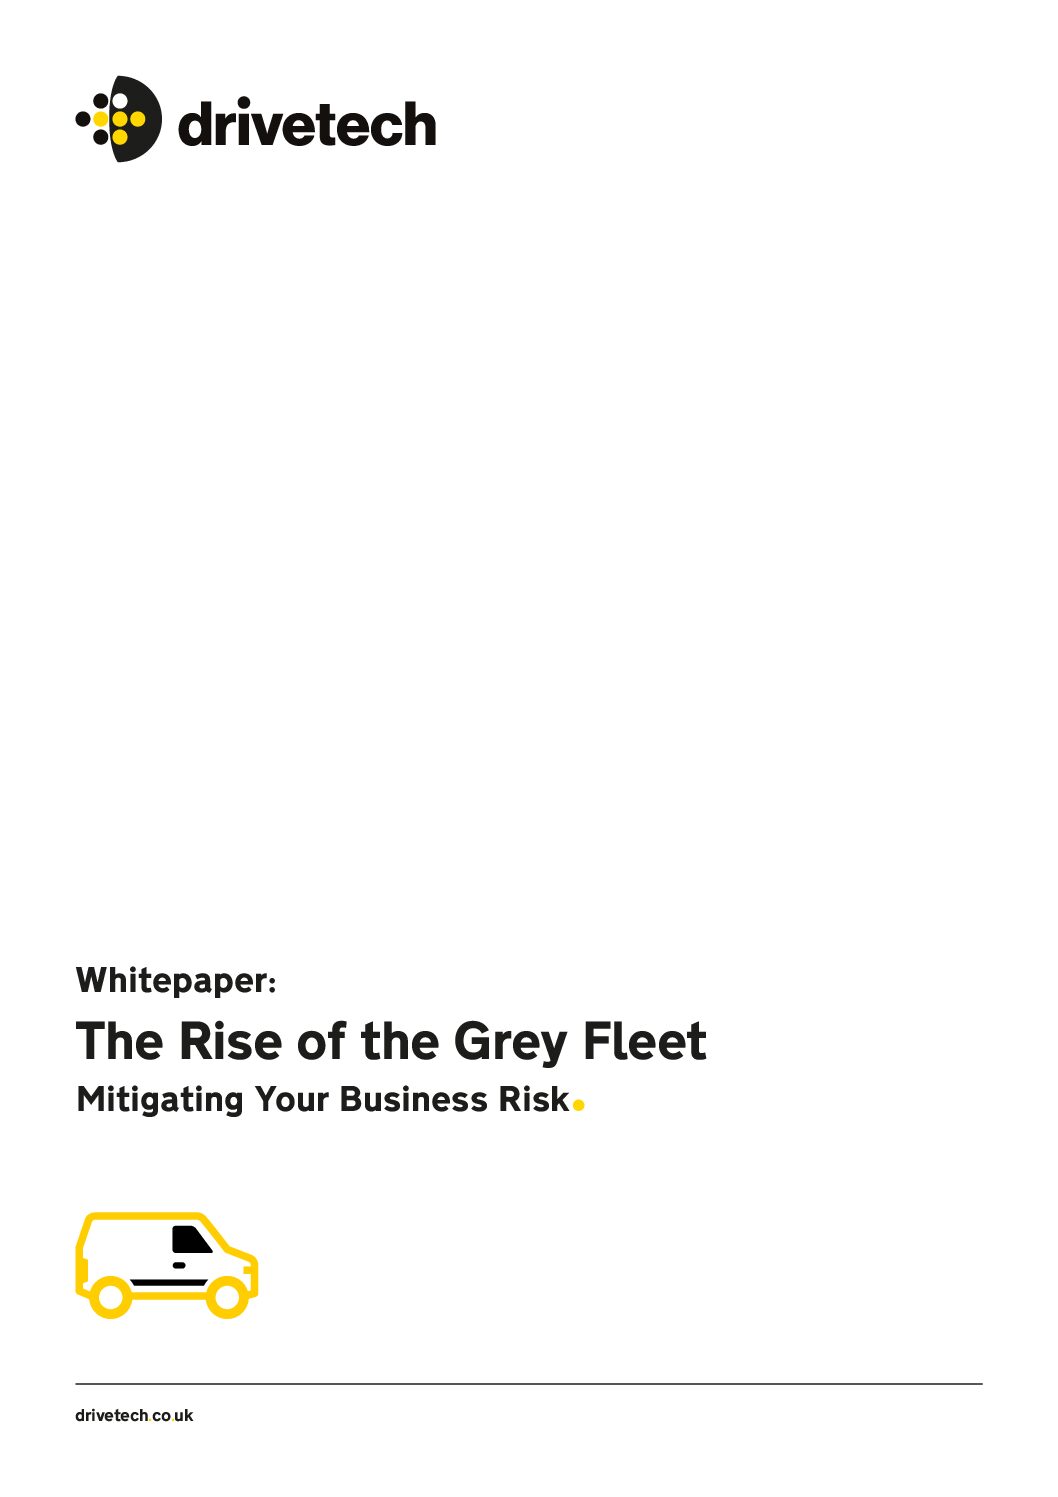 Whitepaper – The Rise of the Grey Fleet